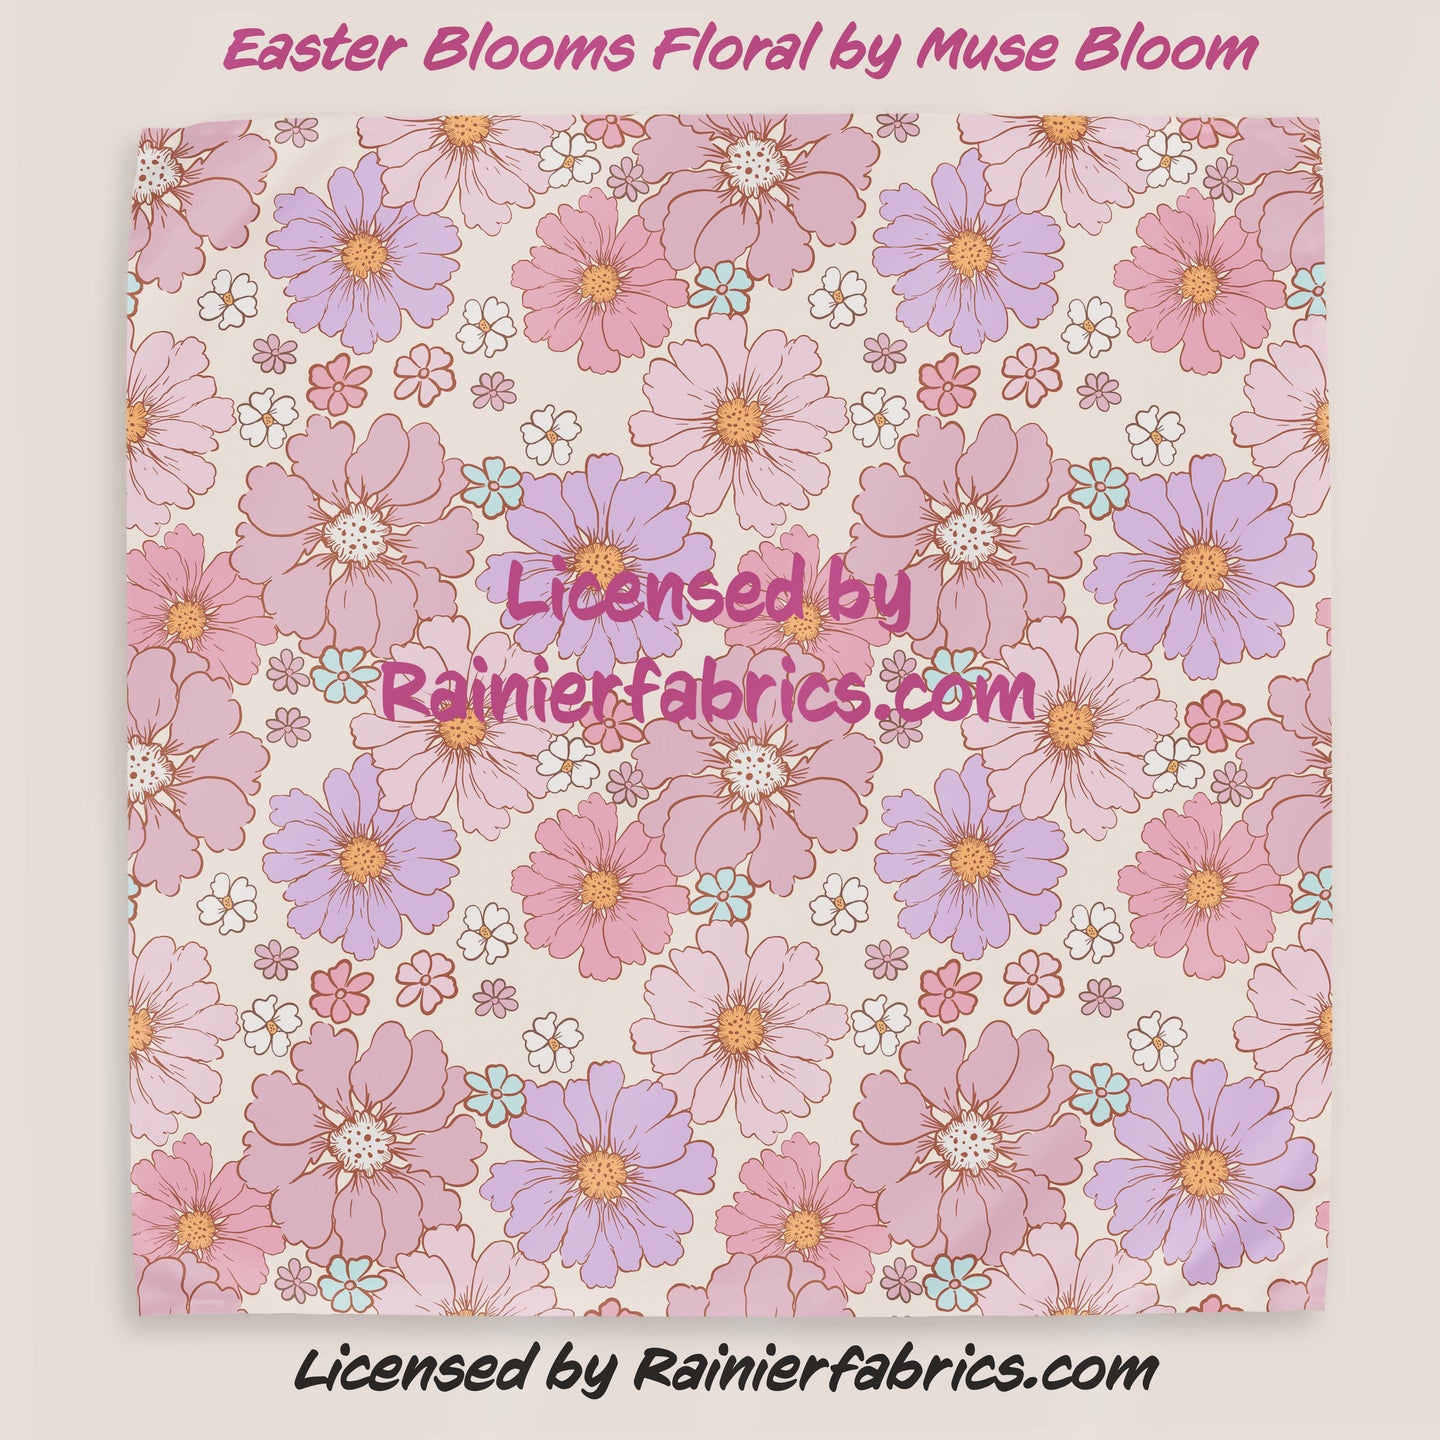 Muse Blooms Easter Floral - 2-5 business days to ship - Order by 1/2 yard